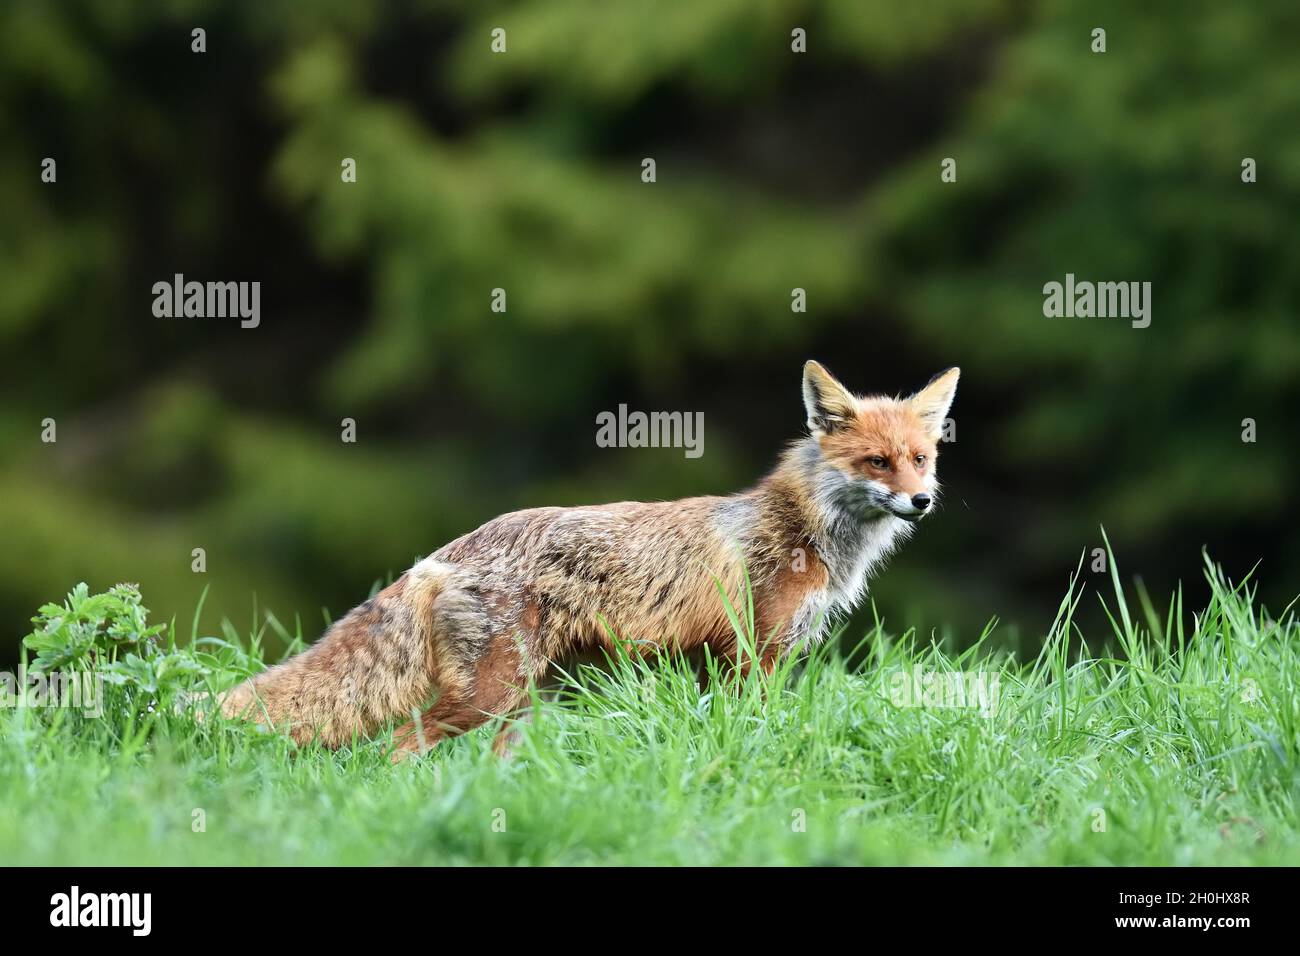 Red fox in forest background Stock Photo